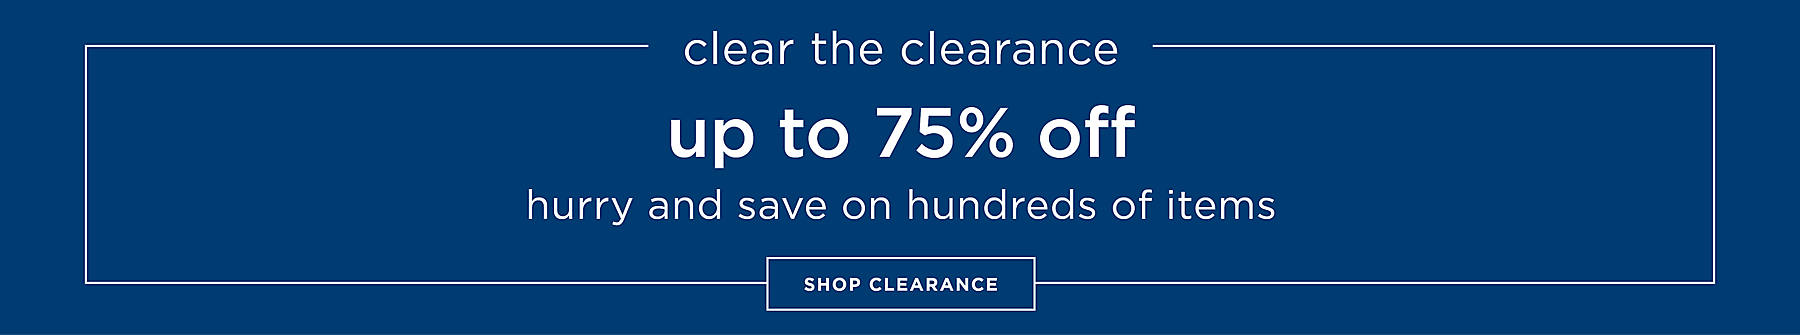 Clear the Clearance Up to 75% Off Hurry and save on hundreds of items Shop Clearance